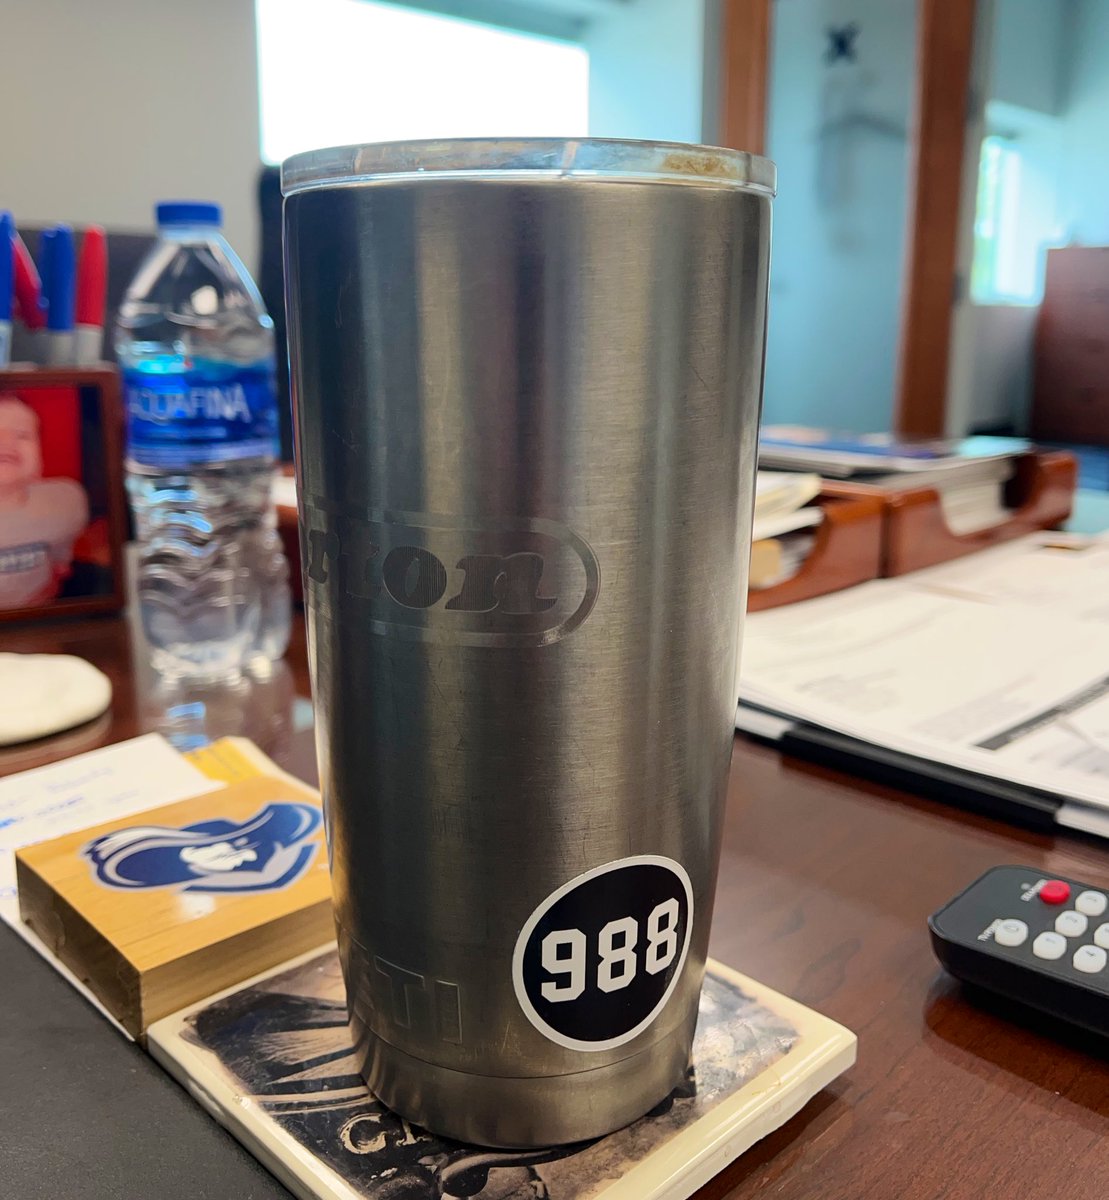 It’s National Suicide Prevention Week, so I added a new sticker to my Yeti. 988 is the National Suicide Hotline. Please call if you or a loved one needs help. #BeTheDifference #KeepShowingUp